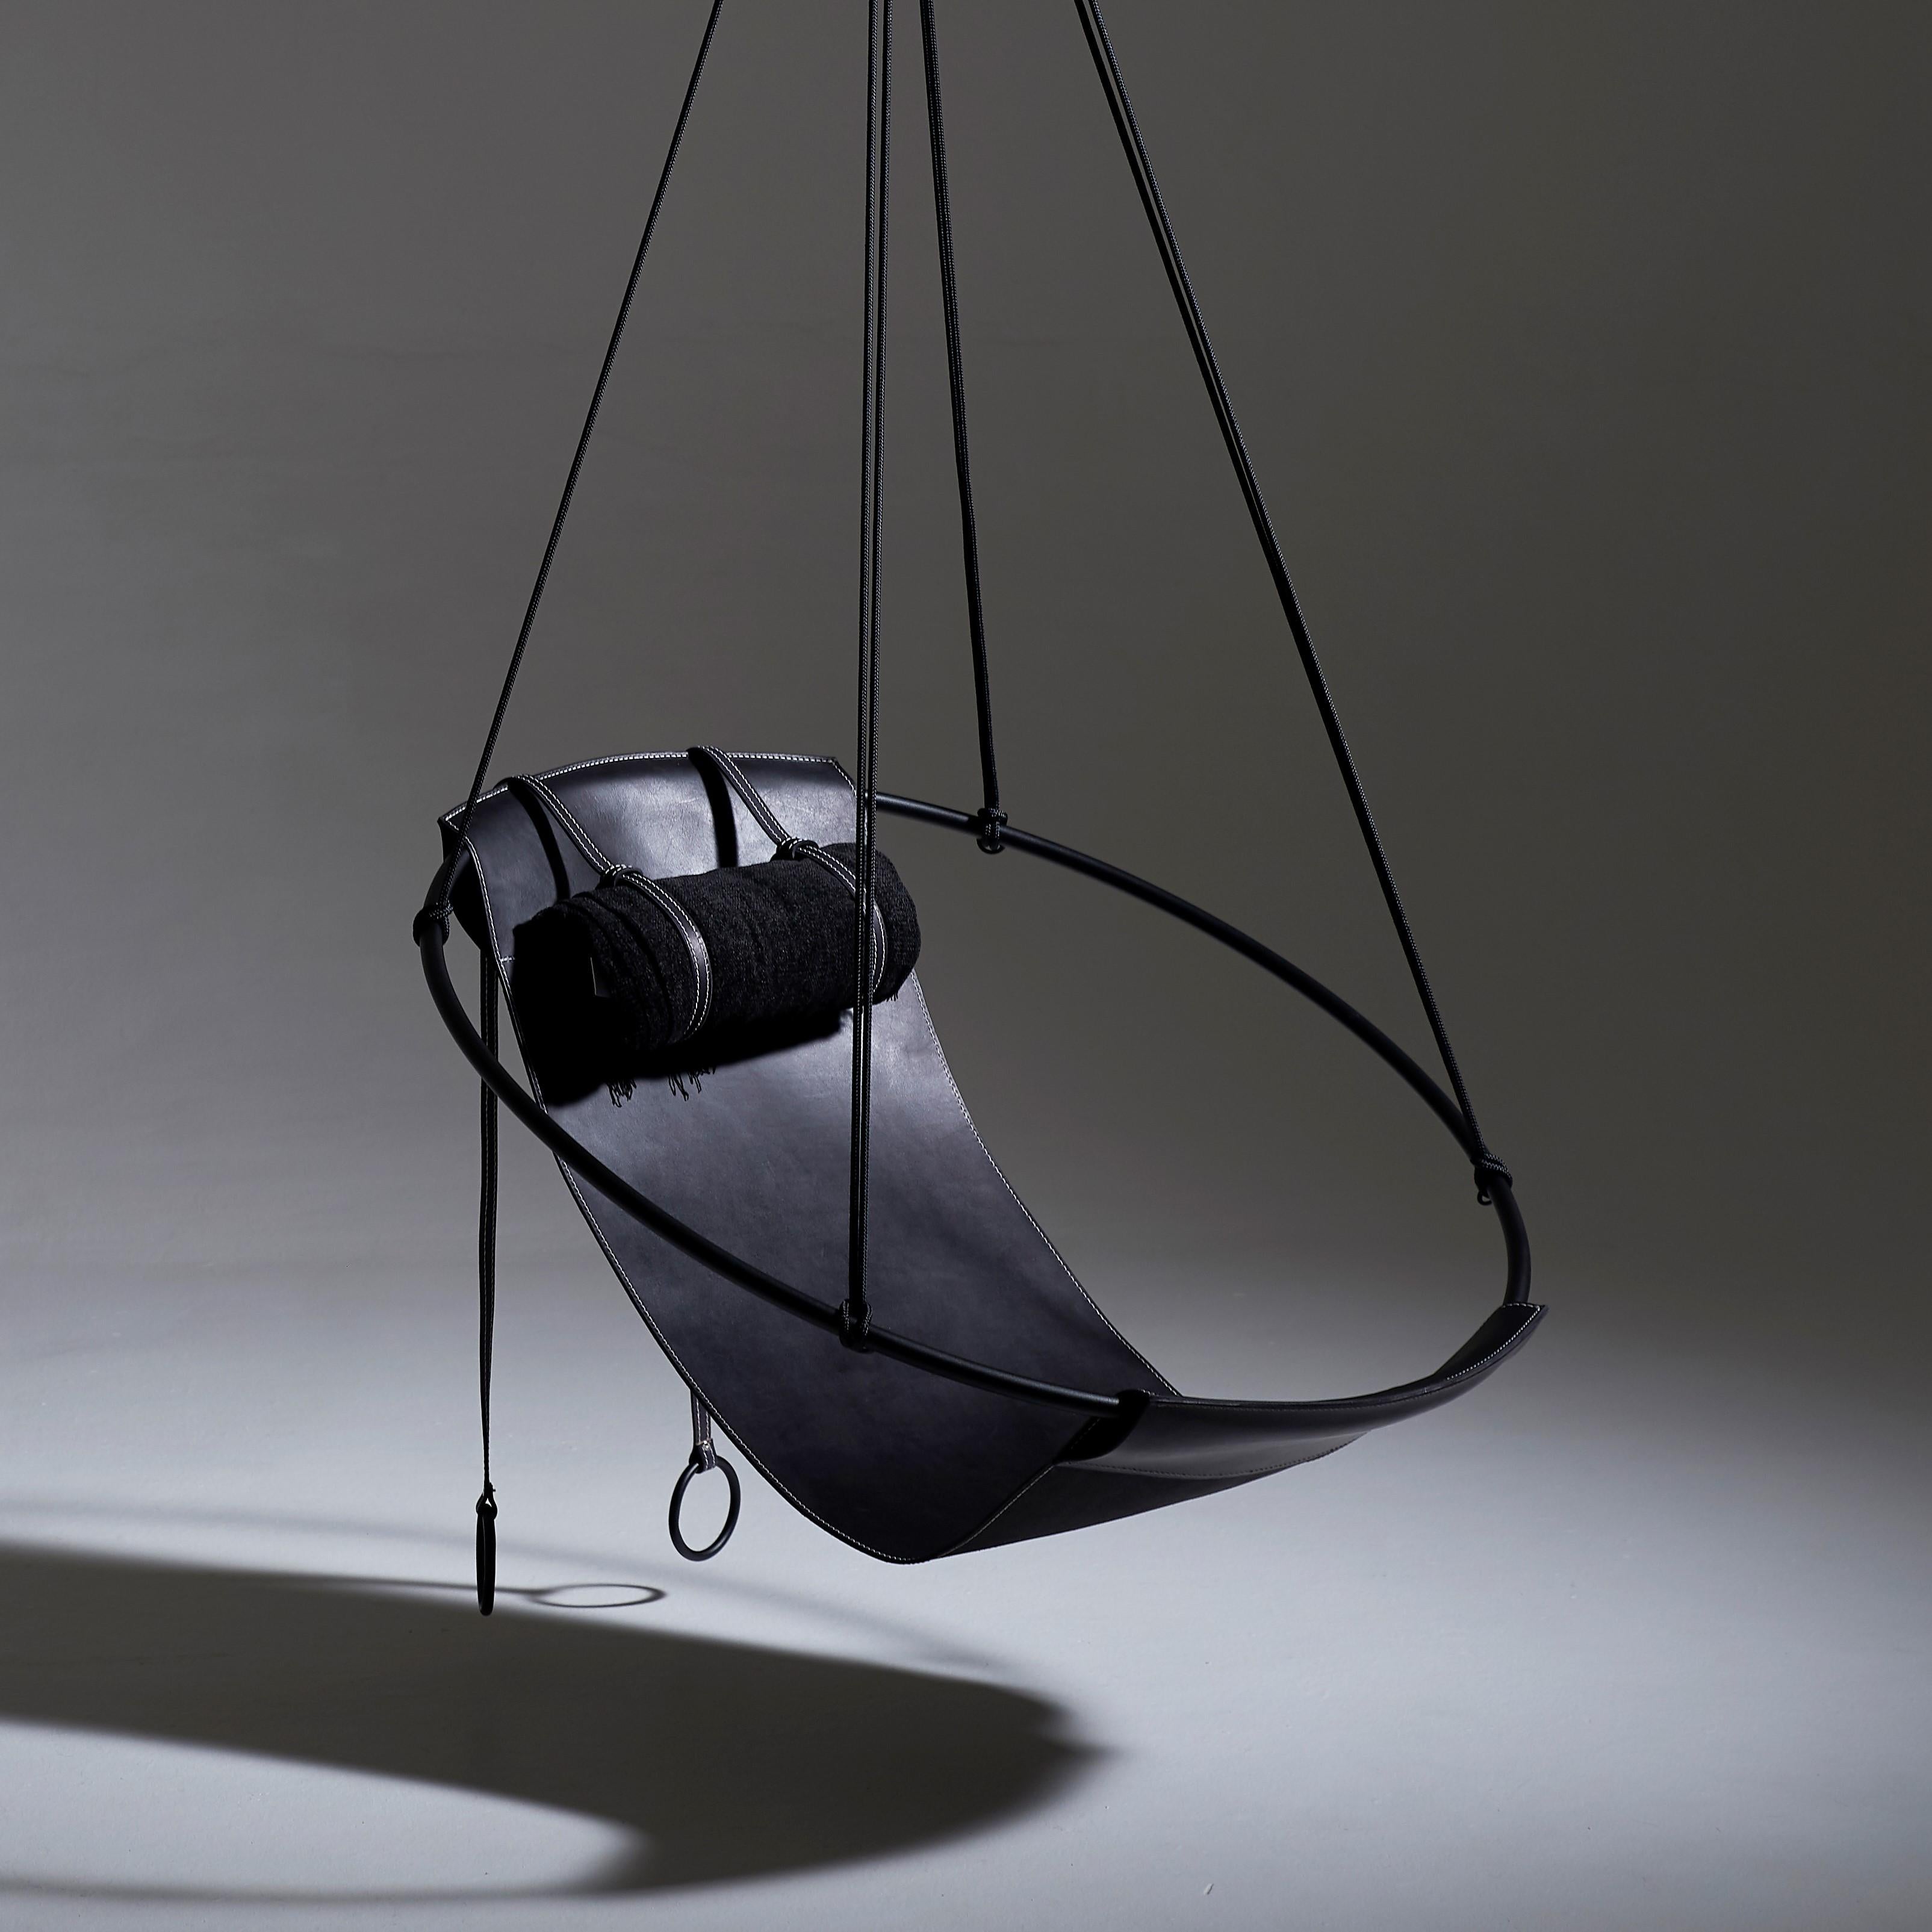 Stripped away from all excess, this hanging chair has a circular frame with a sheet of natural thick leather hanging loose within it, to create a sleek, sexy, and oh so comfortable experience. This chair’s clean lines and lightness makes it a